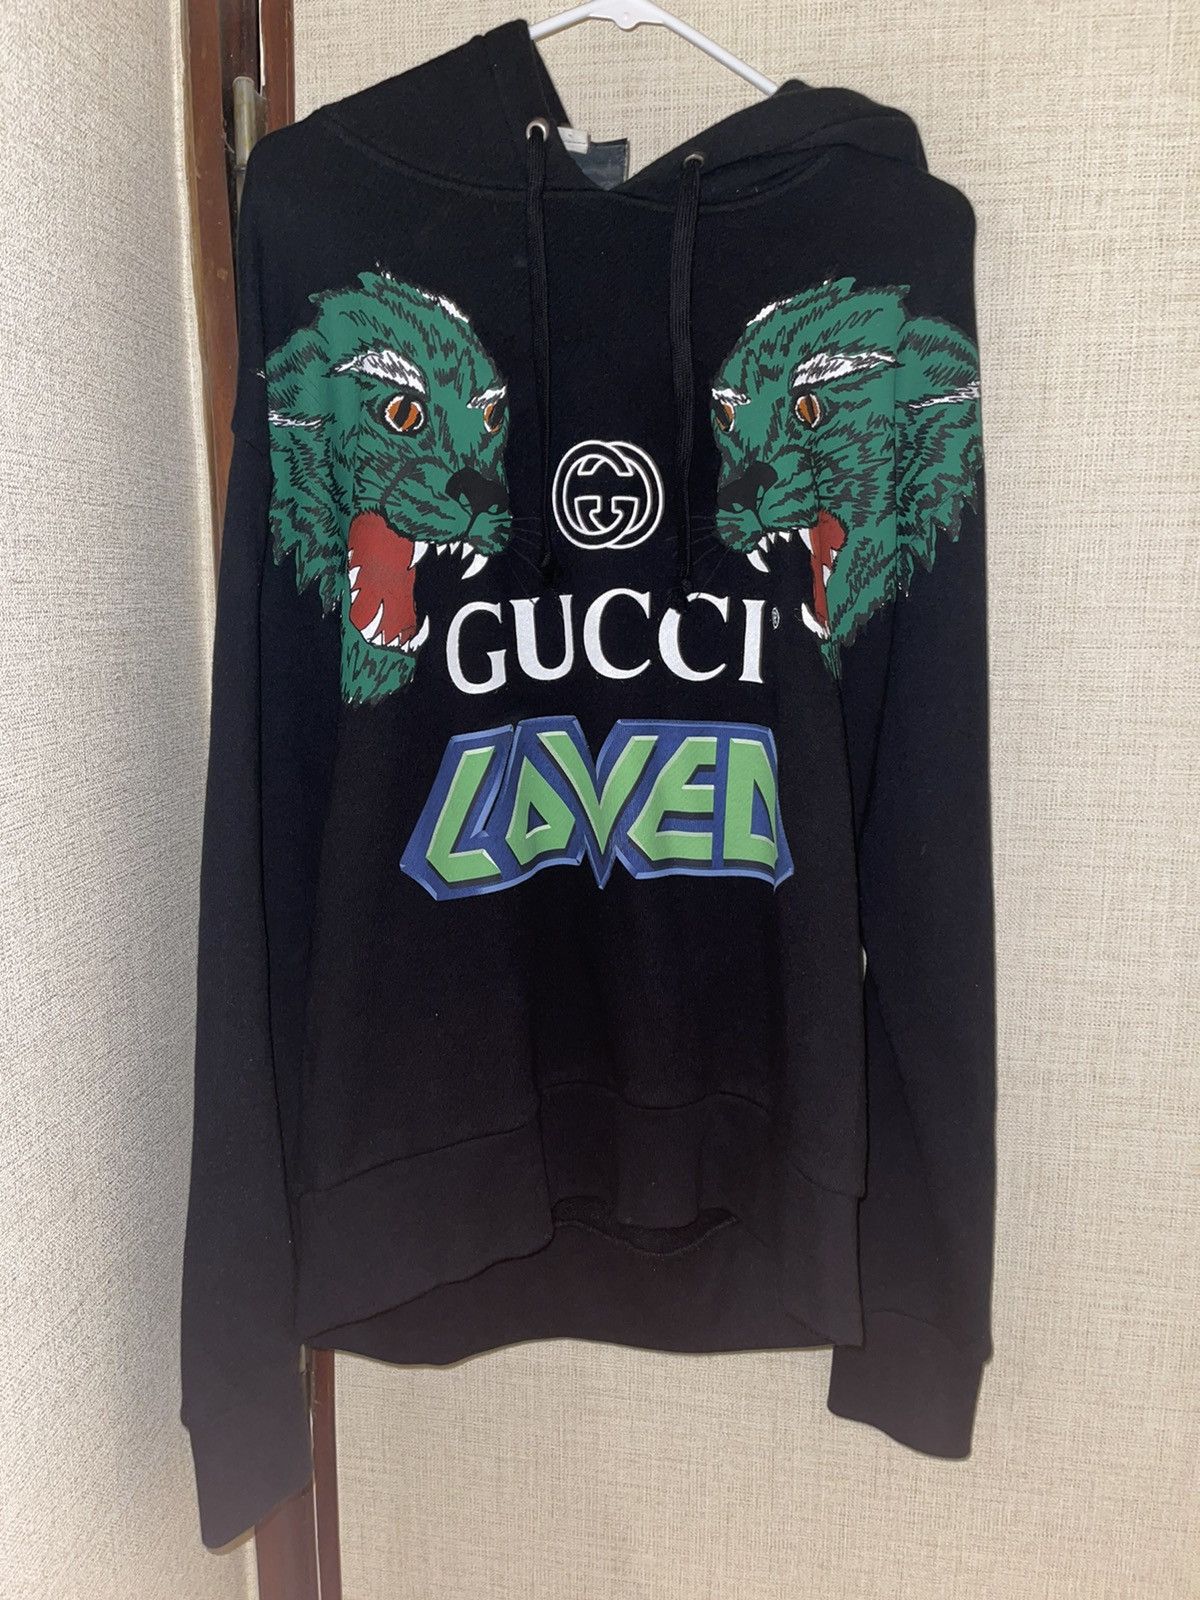 Gucci Gucci LOVED Hoodie Size US S / EU 44-46 / 1 - 1 Preview